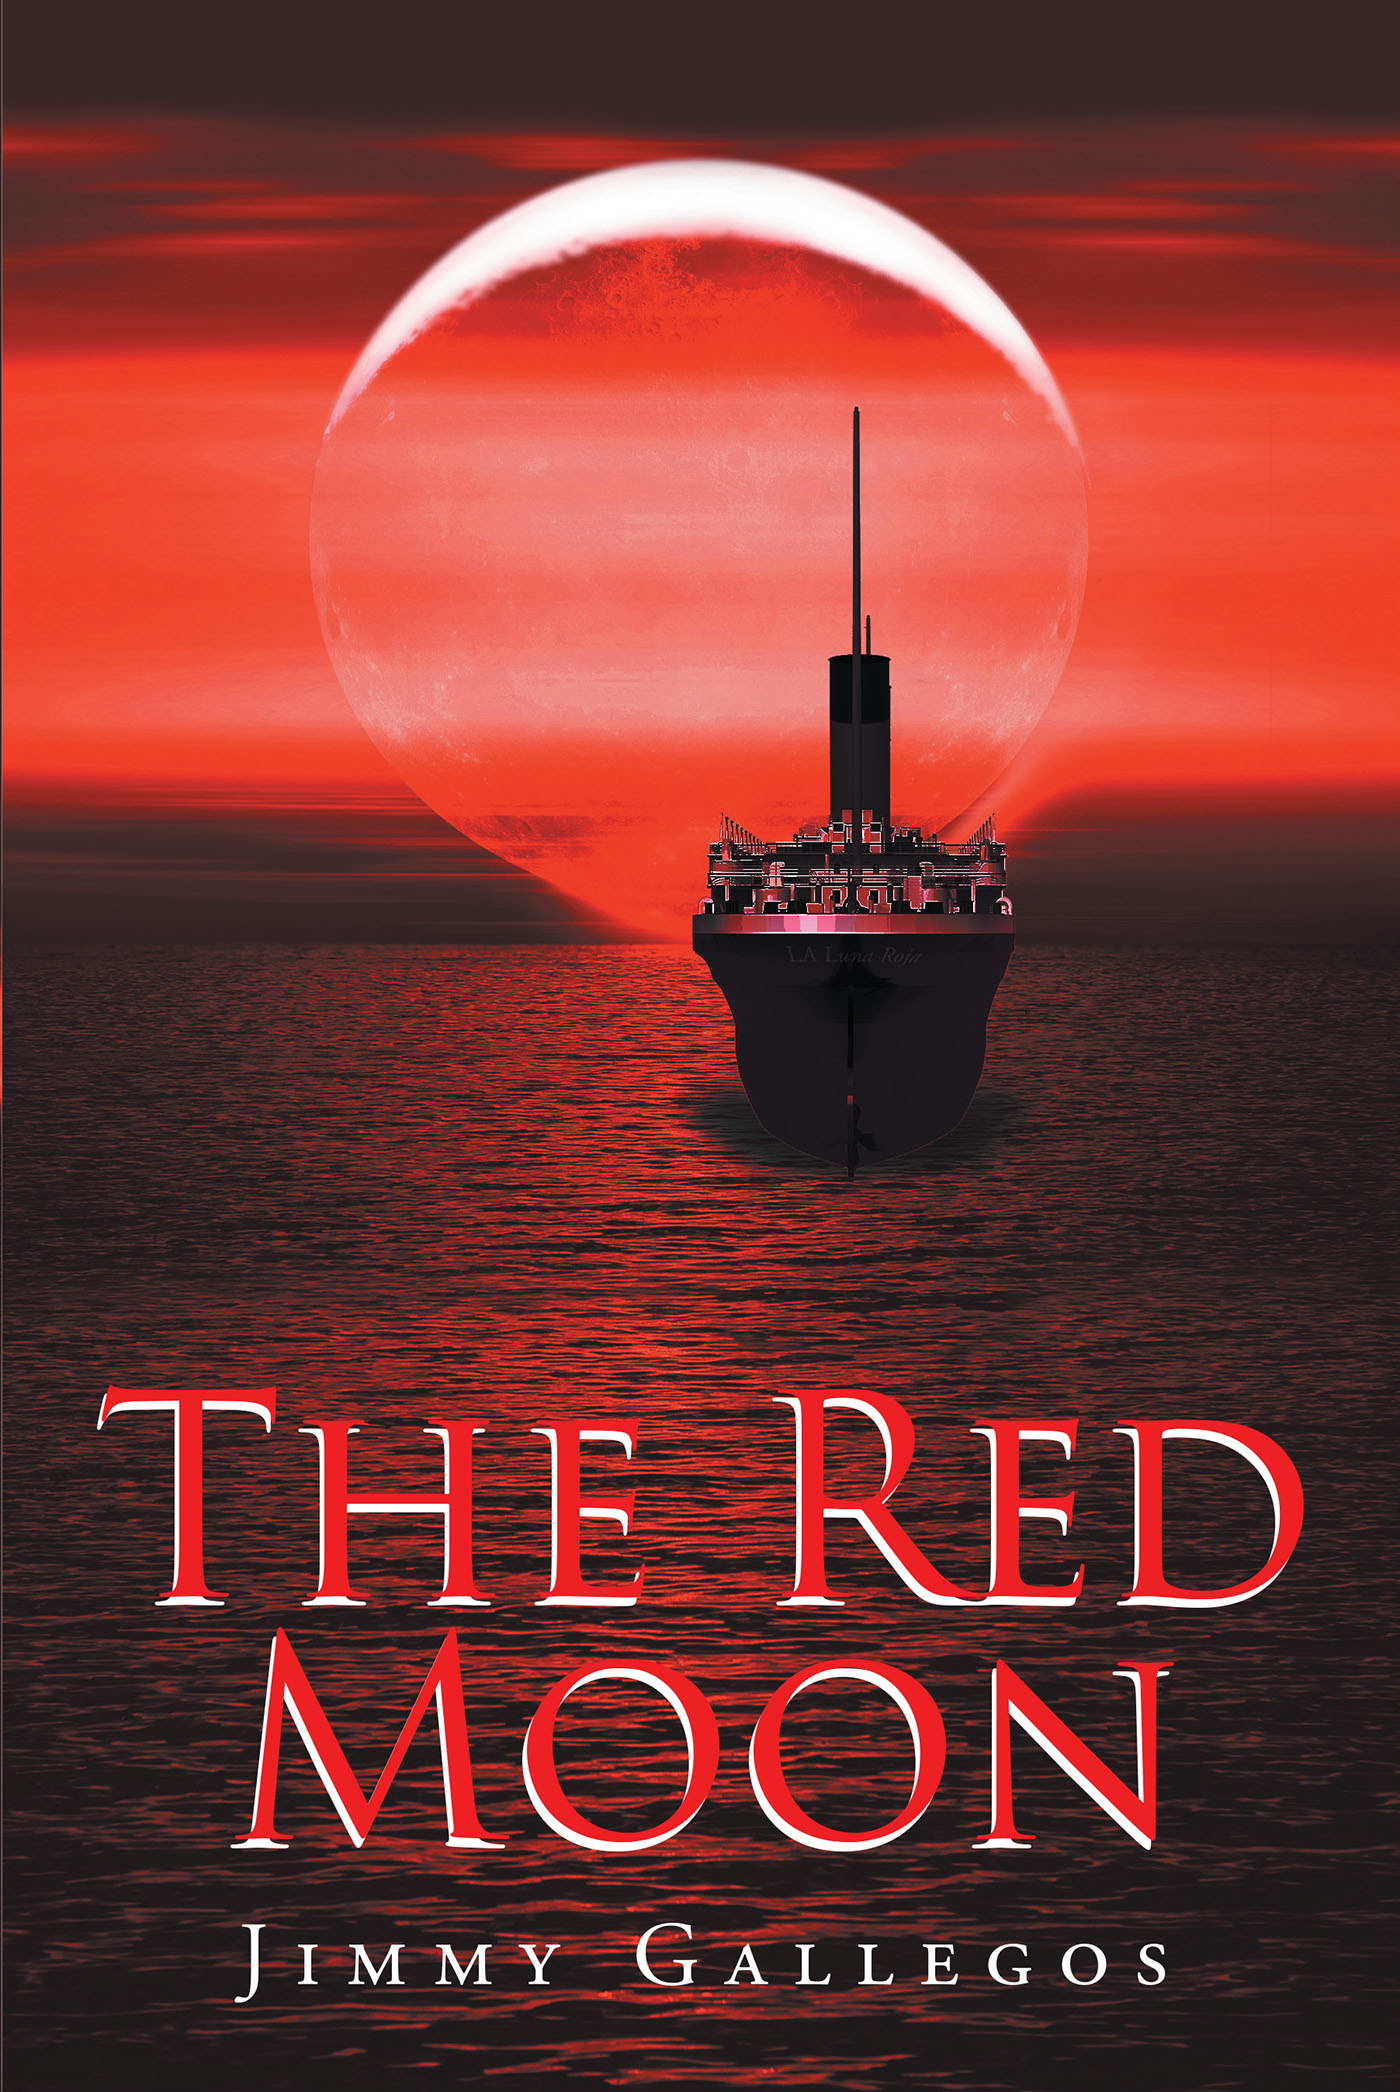 Author Jimmy Gallegos’s New Book, "The Red Moon," Follows an Unassuming Eleven-Year-Old Tossed Into the Tumultuous Foster Care System